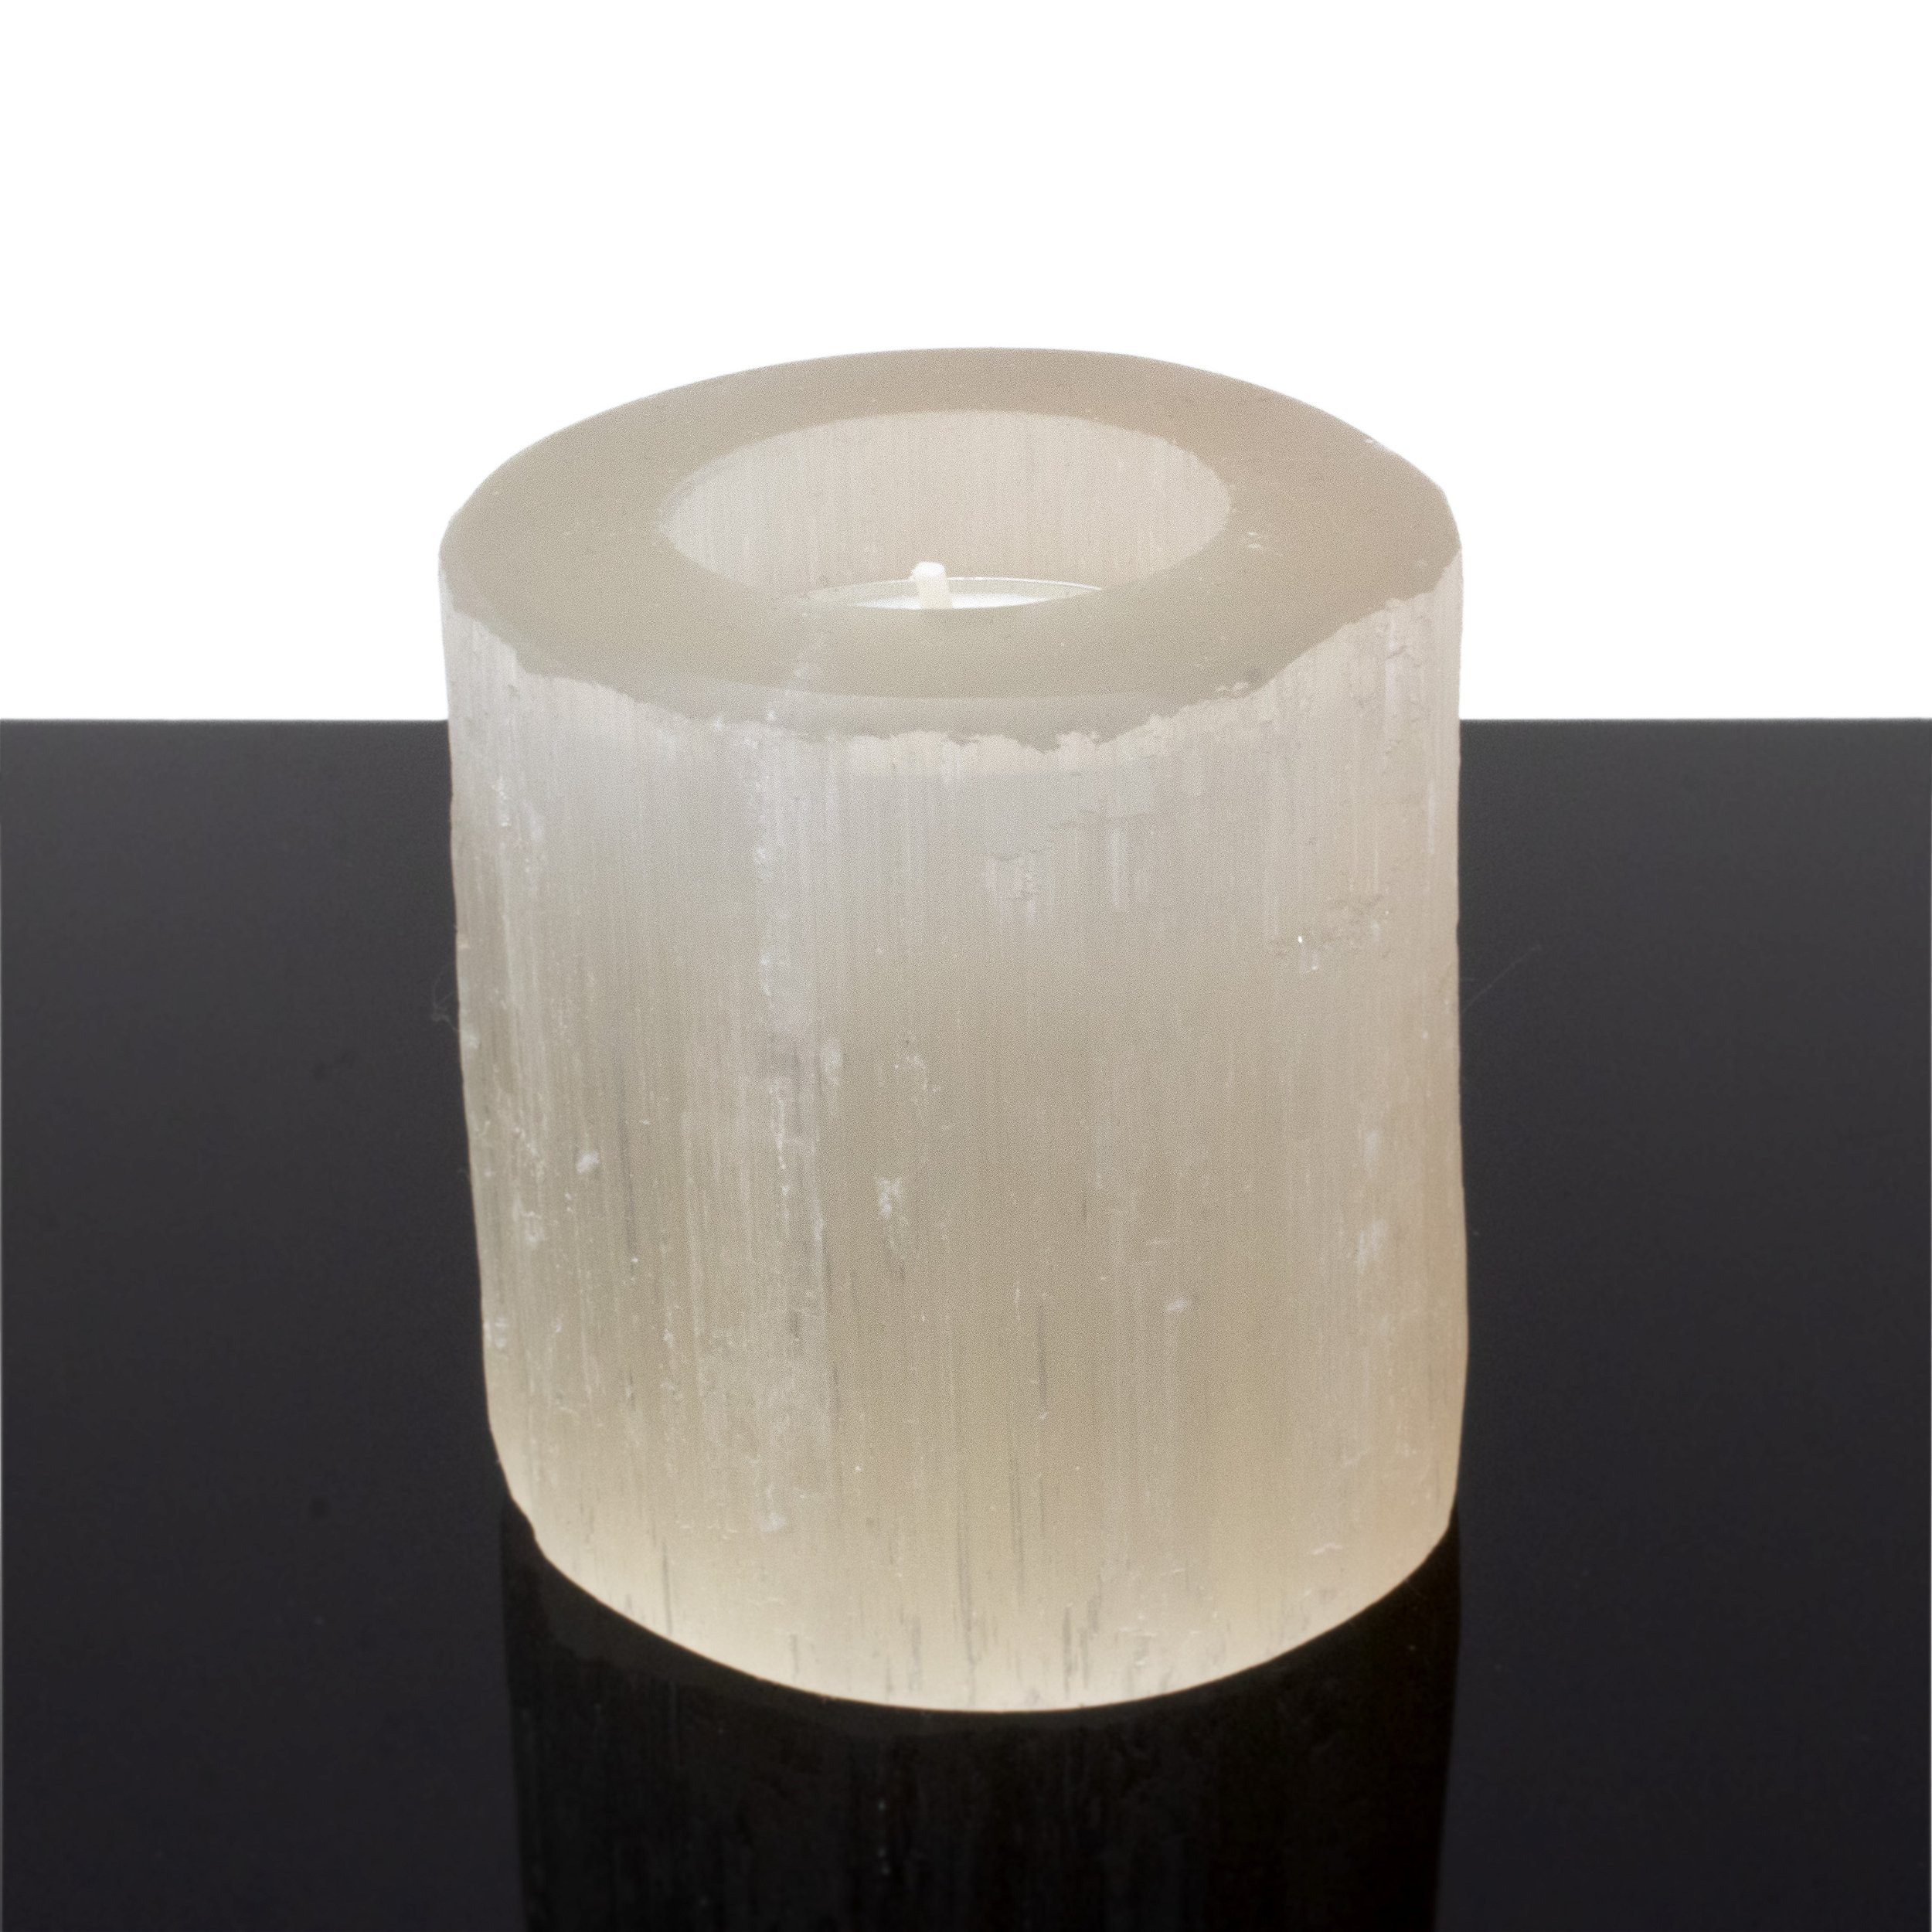 Peach Selenite Candle Holder -Round With Cut Top from Morocco